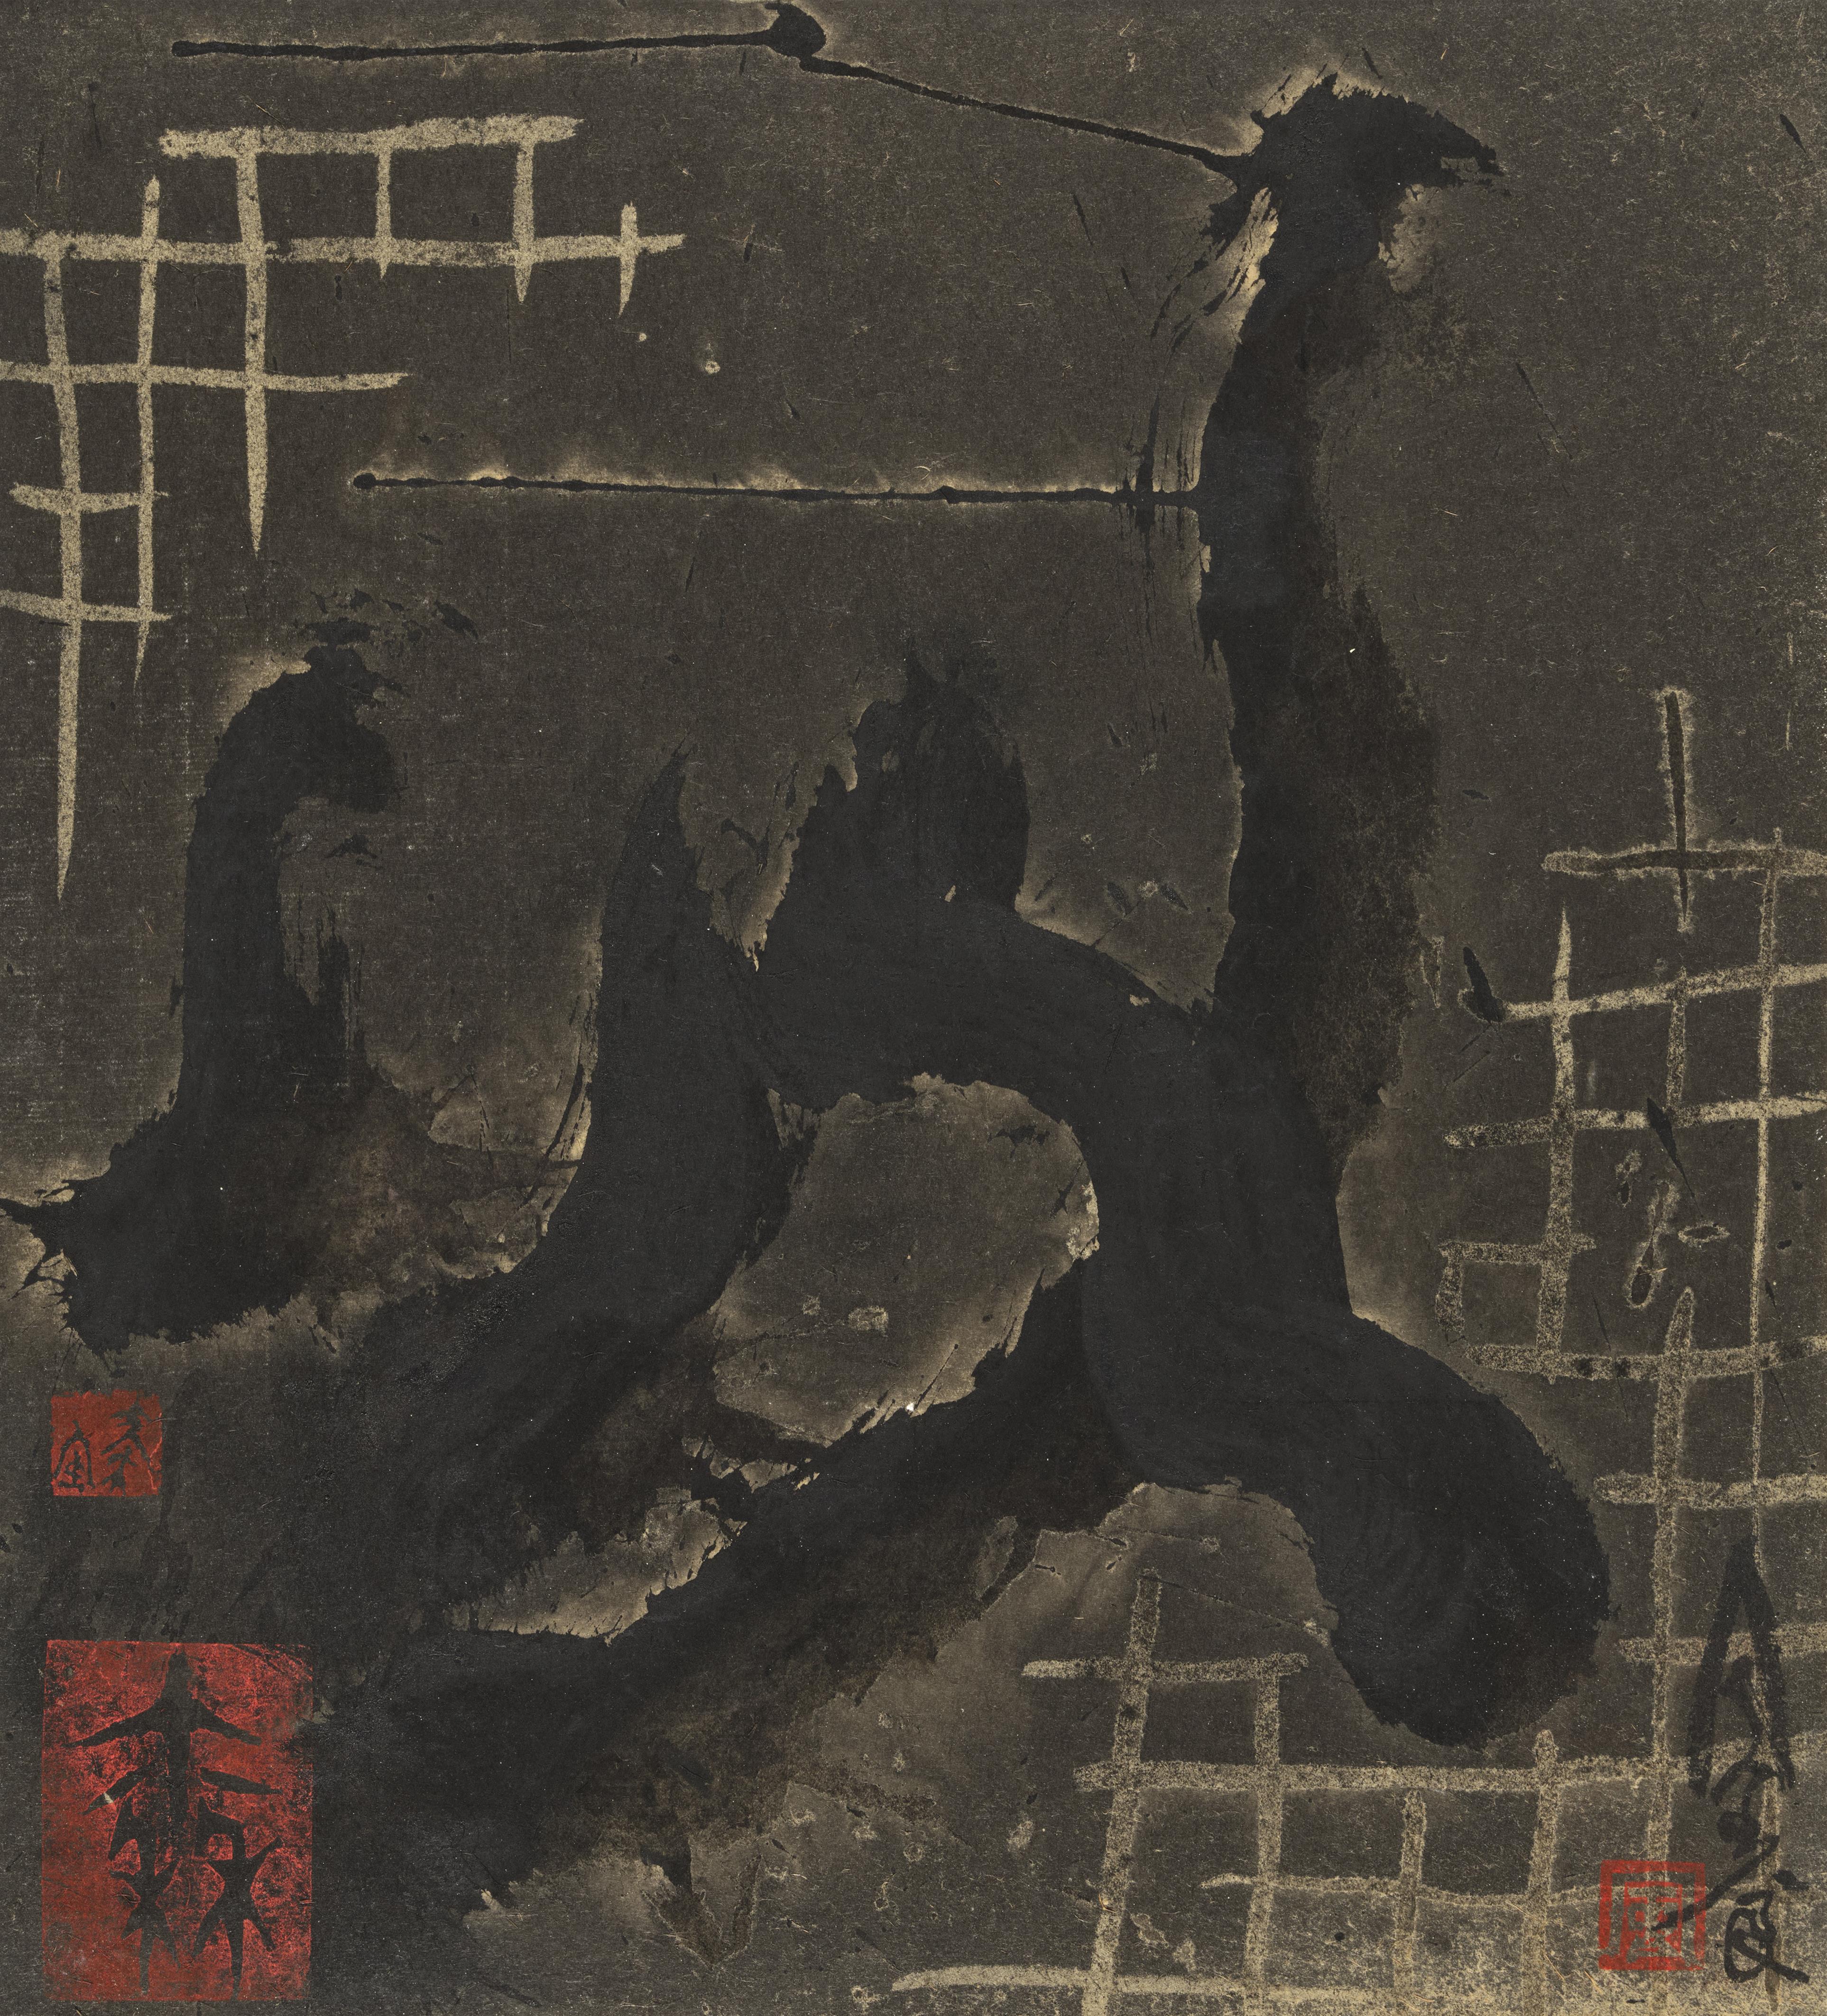 Probably Qin Feng - Total lunar eclipse (yue quan shi). Ink on paper. Sealed Qin Feng, Qin and Feng.

Qin Feng is a leading international ink artist. Qin was invited to Berlin to promote cultural... - image-1